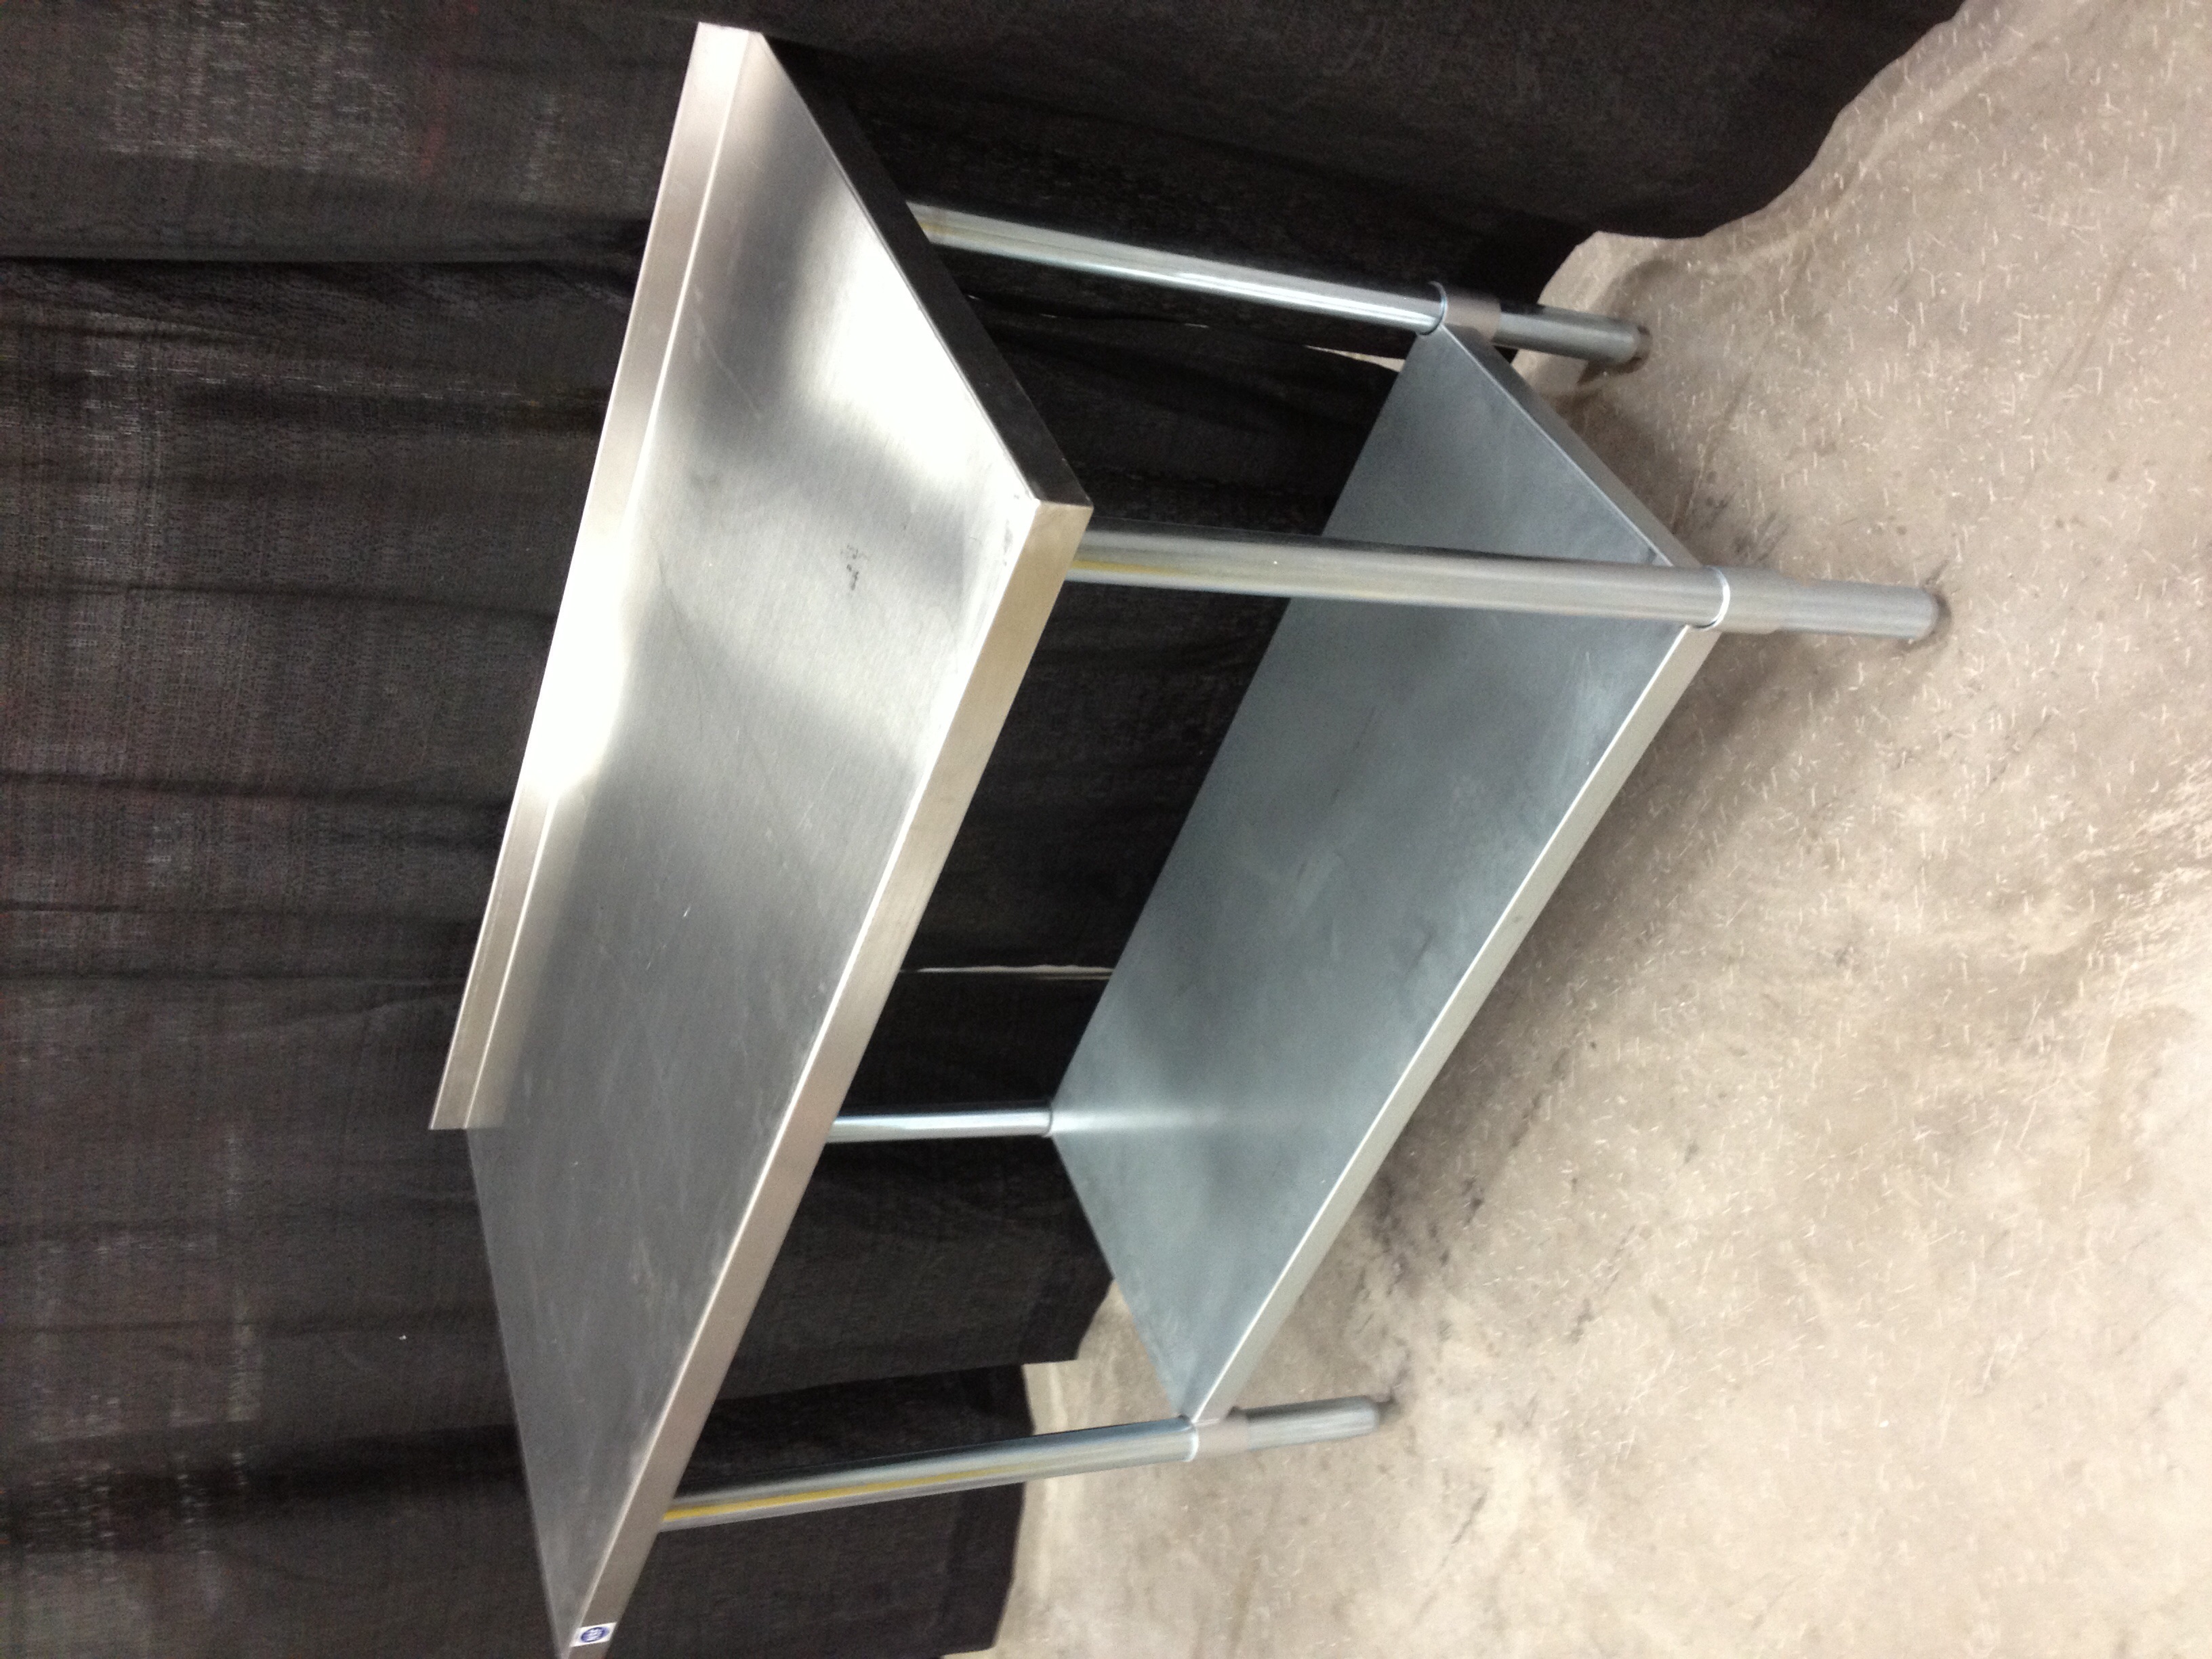 catering kitchen equipment work table